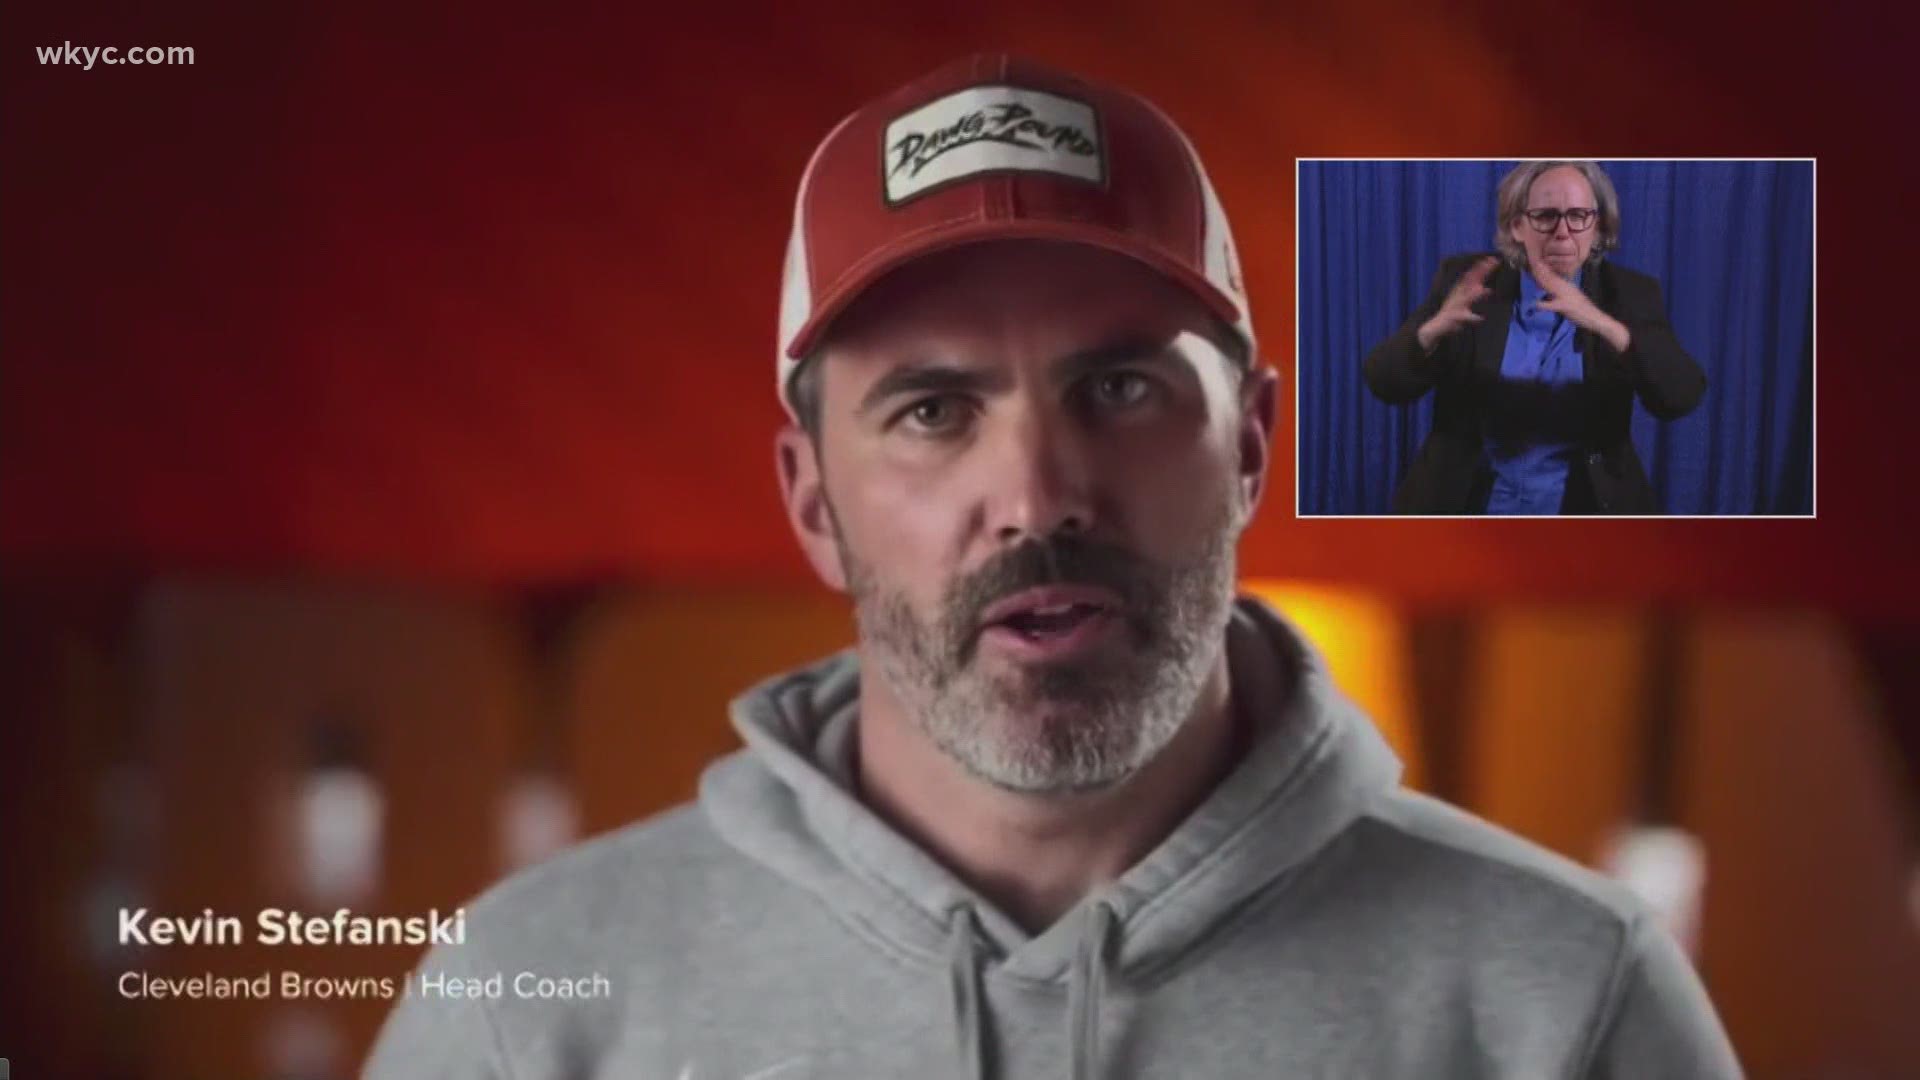 Cleveland Browns head coach Kevin Stefanski is starring in a new public service announcement encouraging Ohioans to get the COVID-19 vaccine.